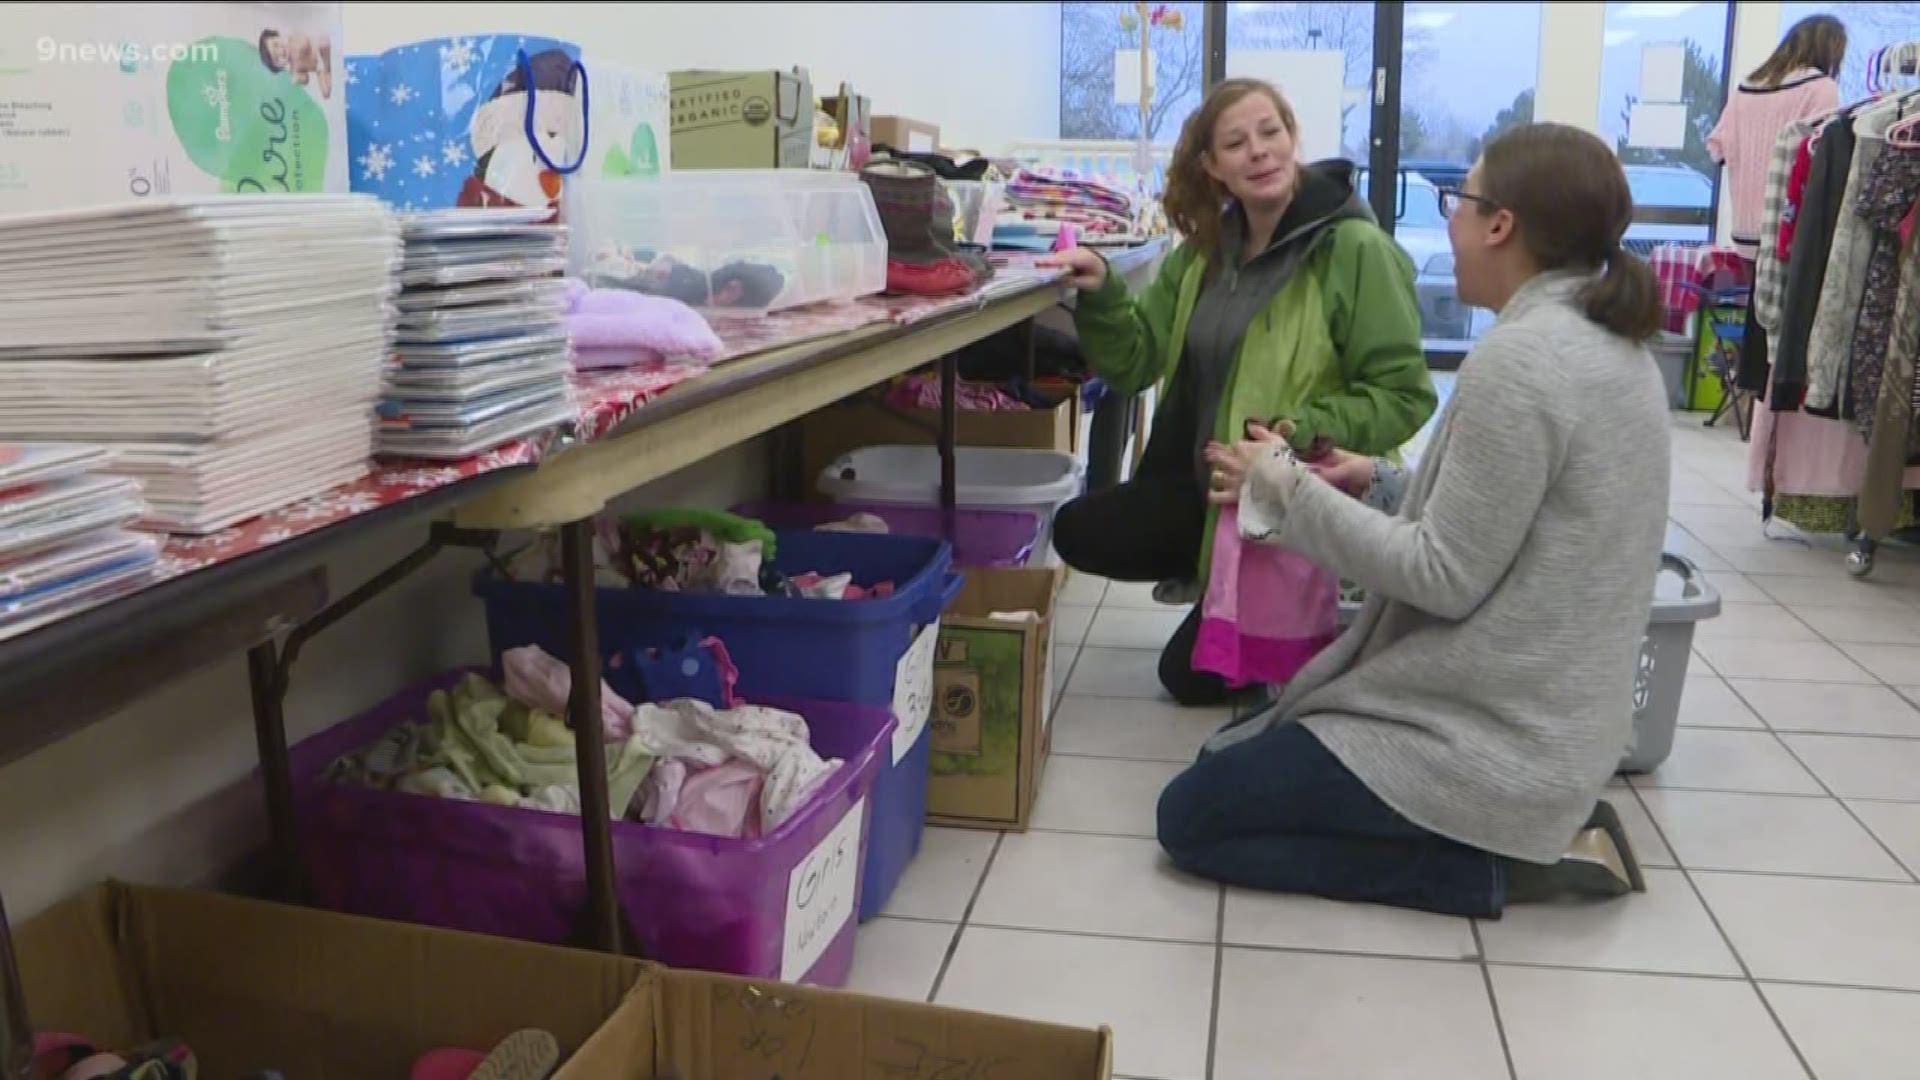 Through December 22, Mother House is letting low-income families ditch the cash and shop for free with proof of need.